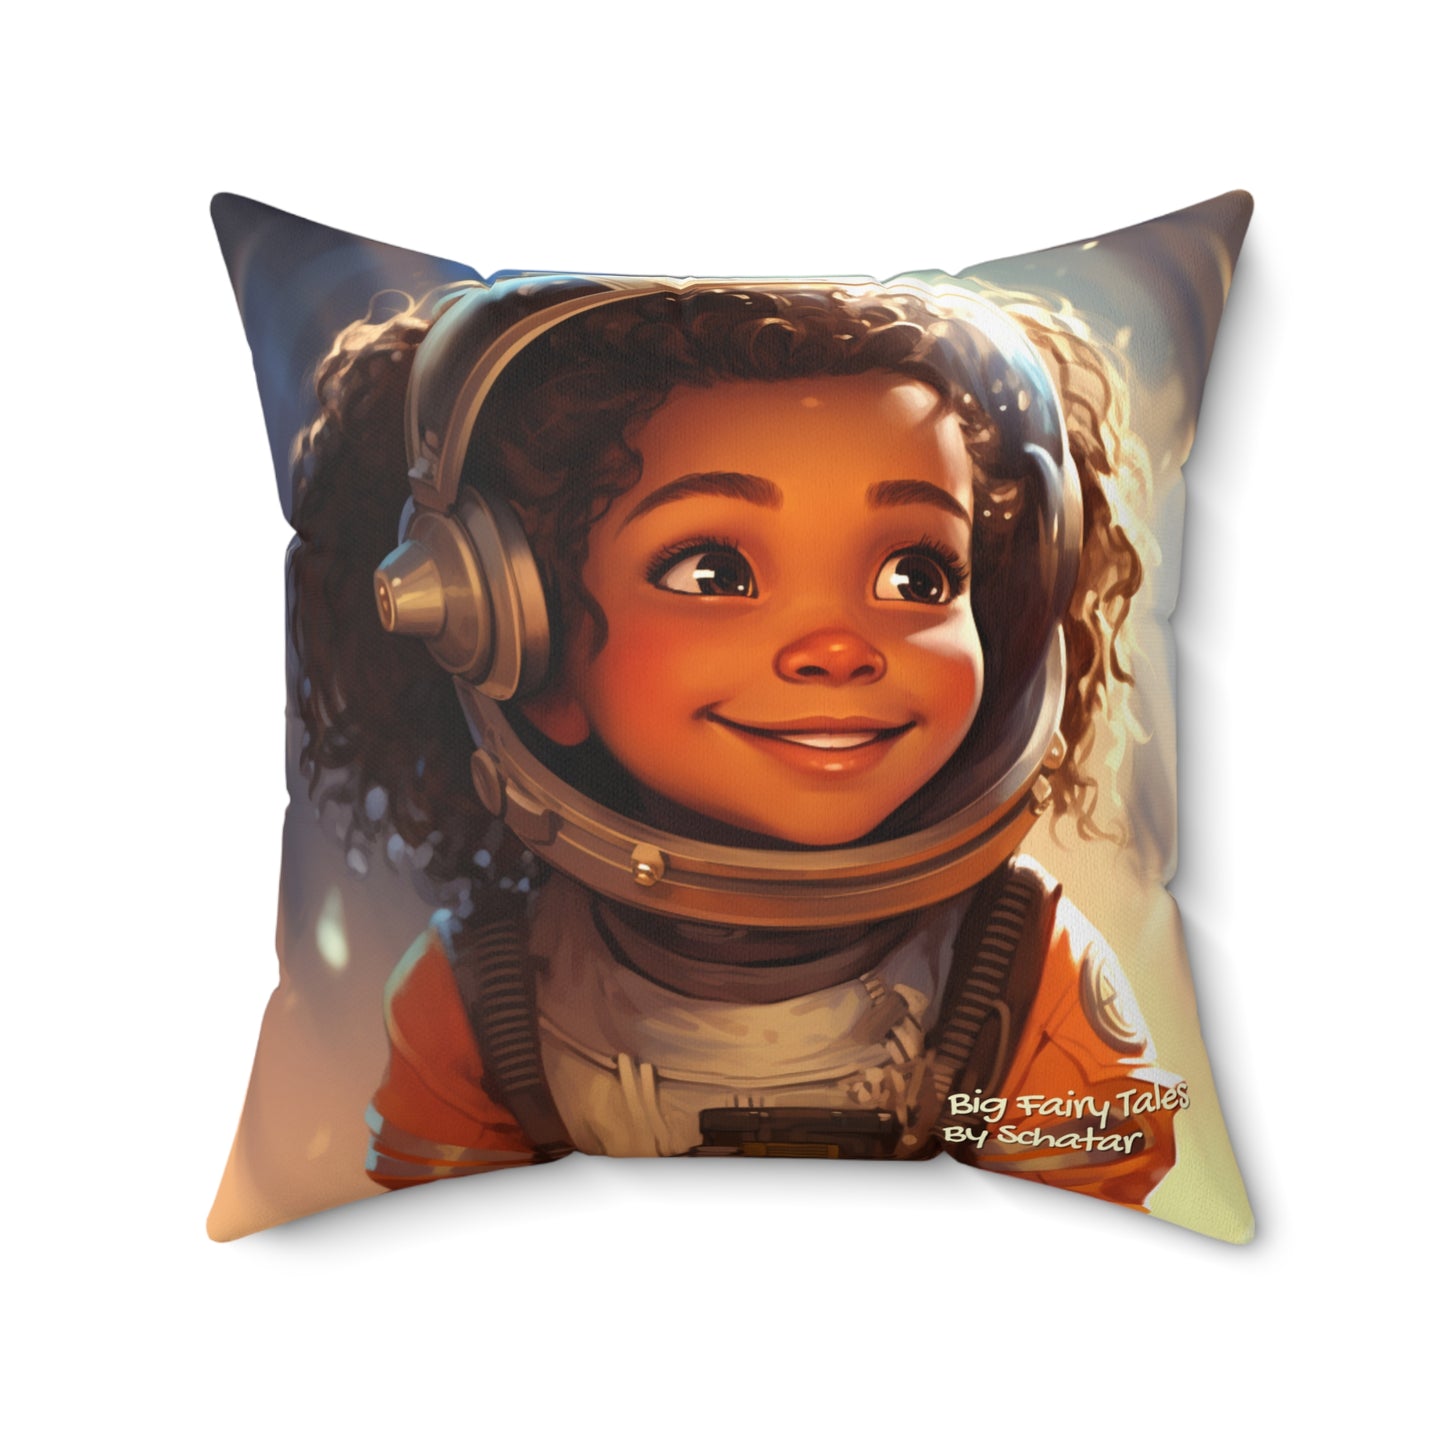 Astronaut - Big Little Professionals Plush Pillow 1 From Big Fairy Tales By Schatar